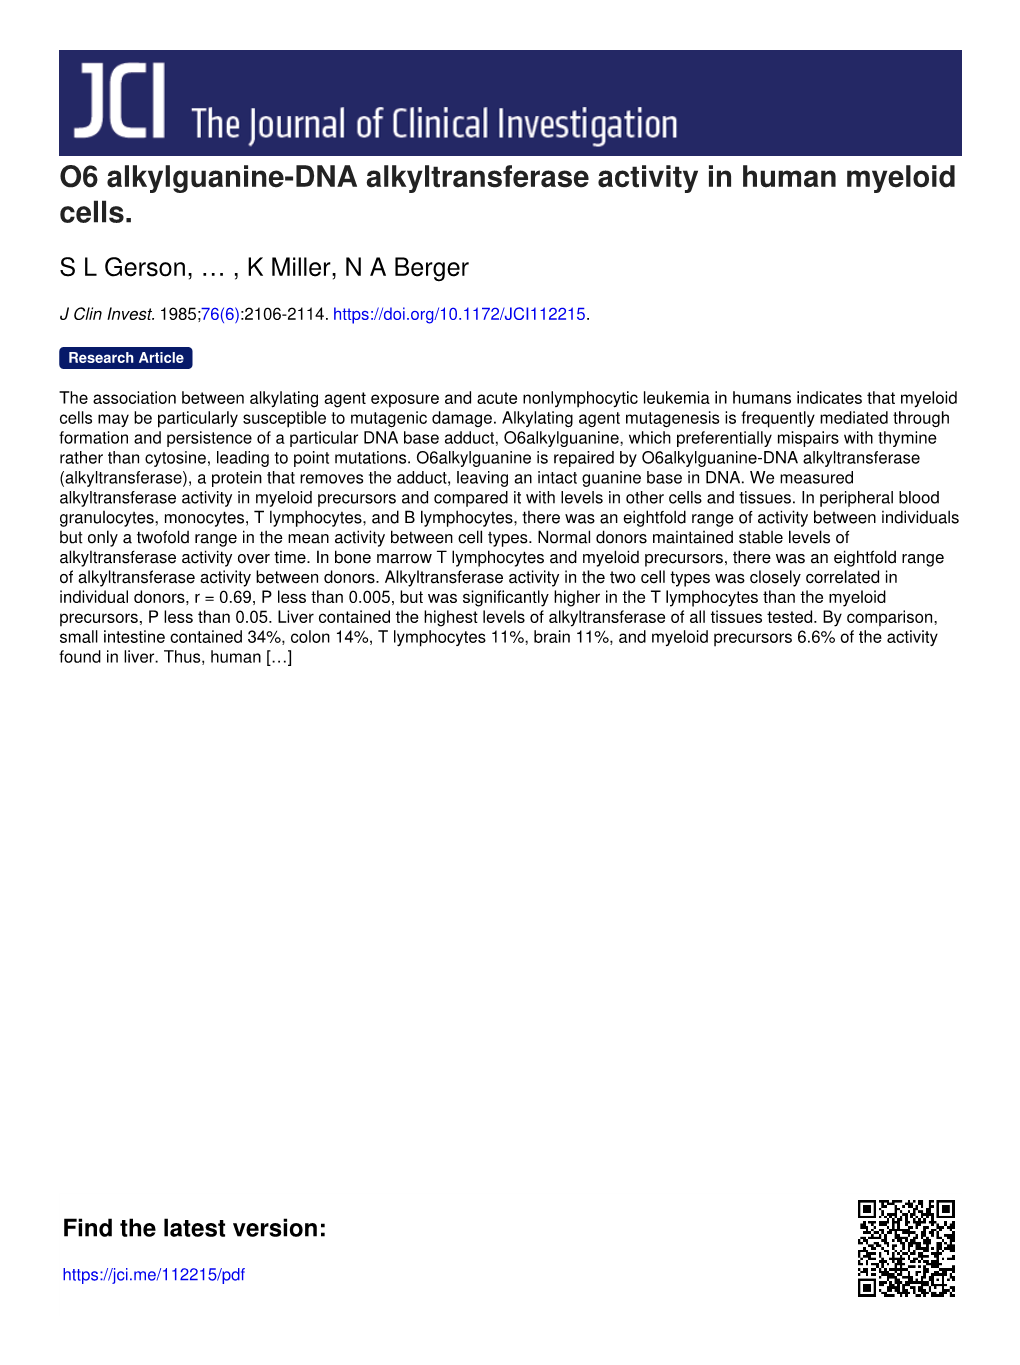 O6 Alkylguanine-DNA Alkyltransferase Activity in Human Myeloid Cells